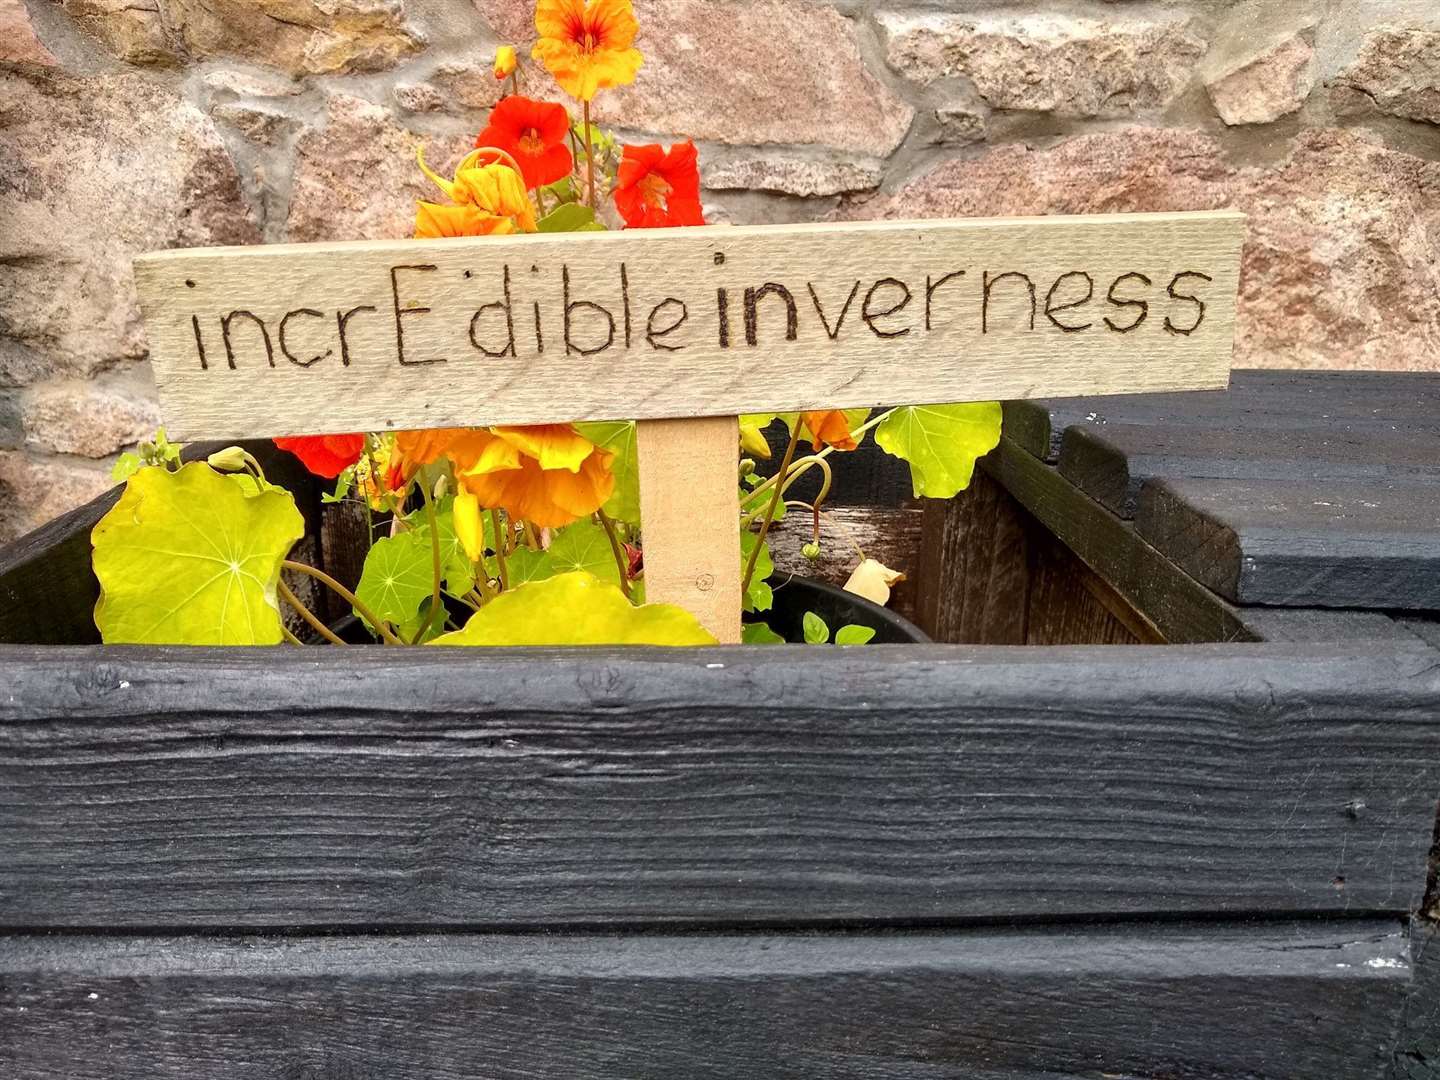 Incredible Edible Inverness was launched in the summer.